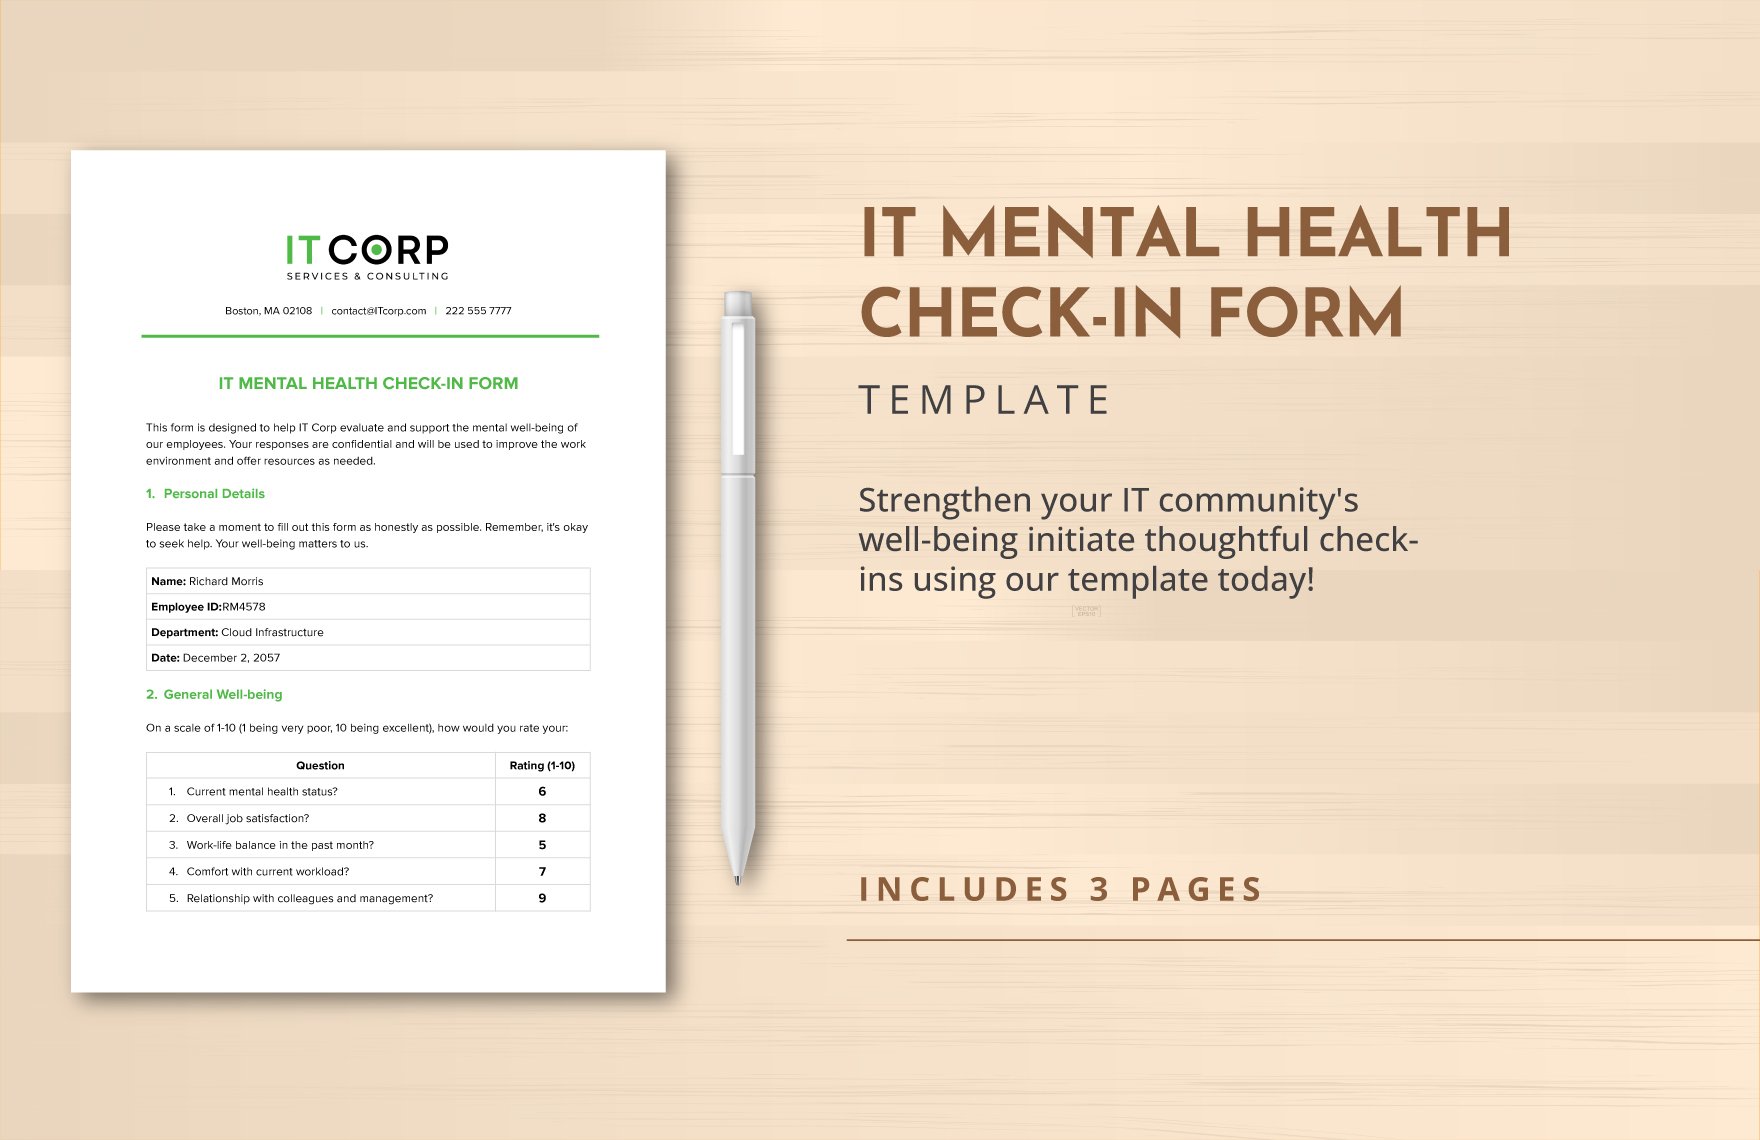 IT Mental Health Check-in Form Template